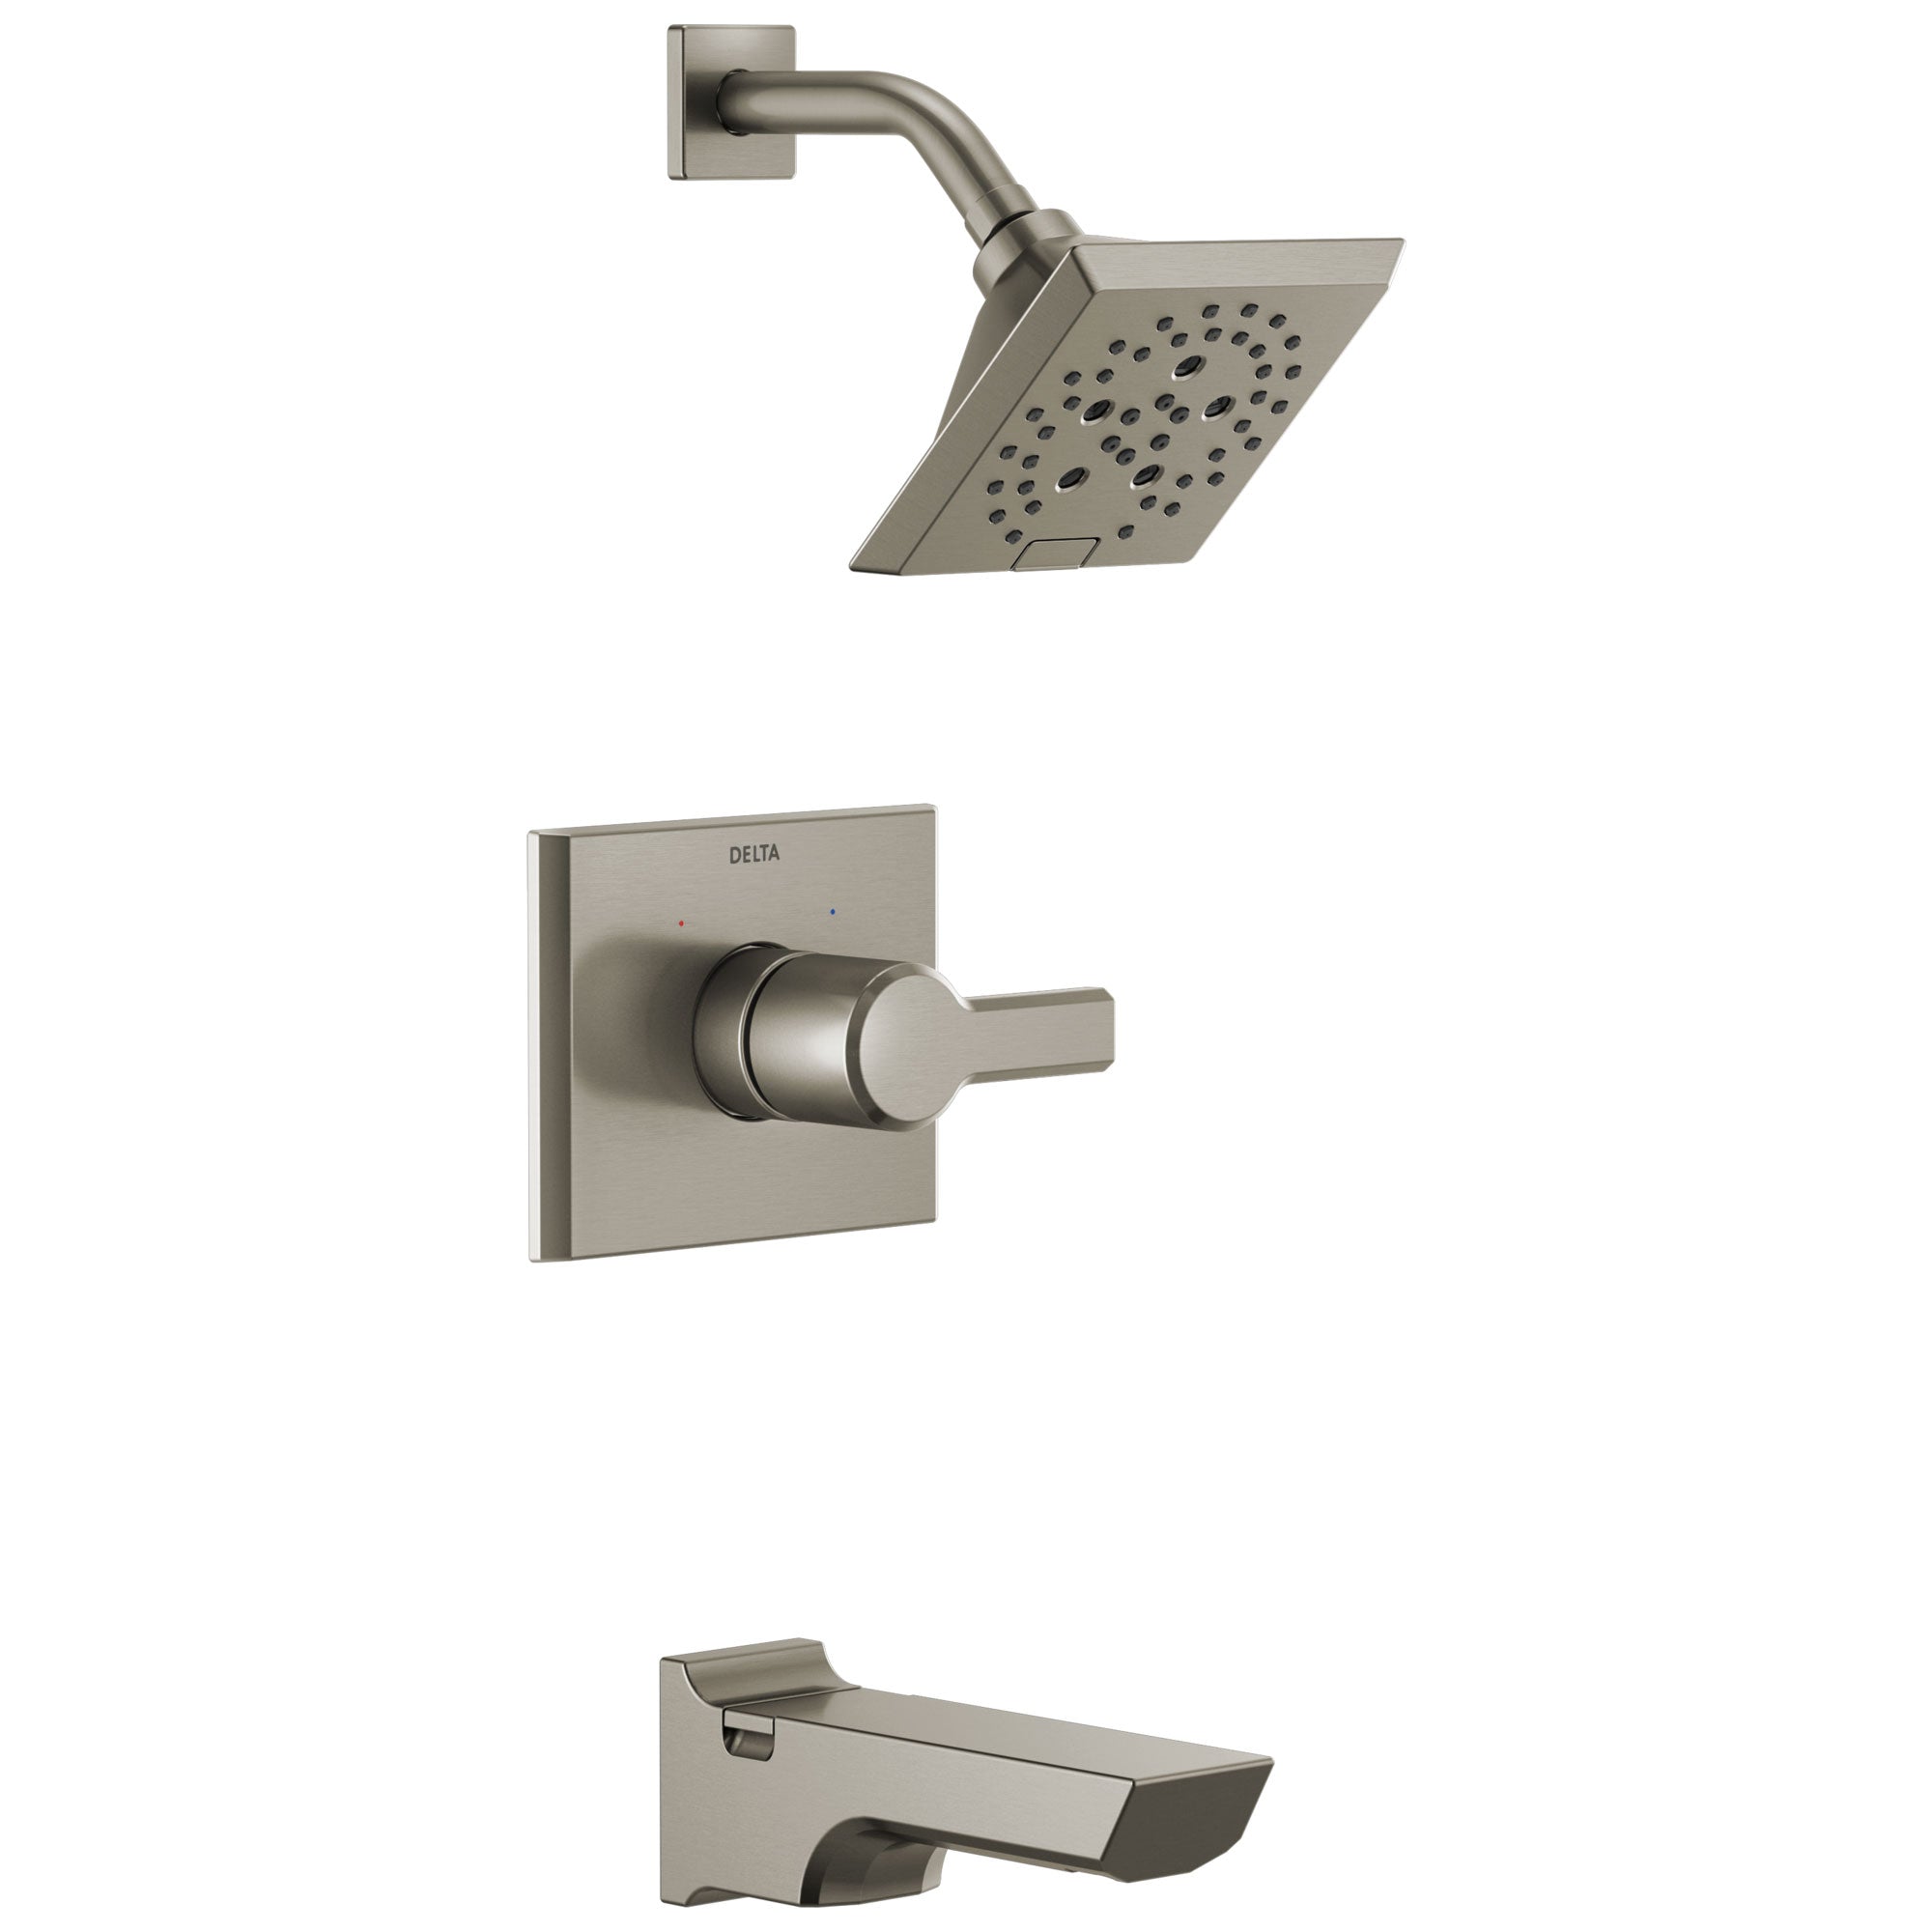 Delta Pivotal Stainless Steel Finish Tub and Shower Combination Faucet Includes Monitor 14 Series Cartridge, Handle, and Valve without Stops D3415V